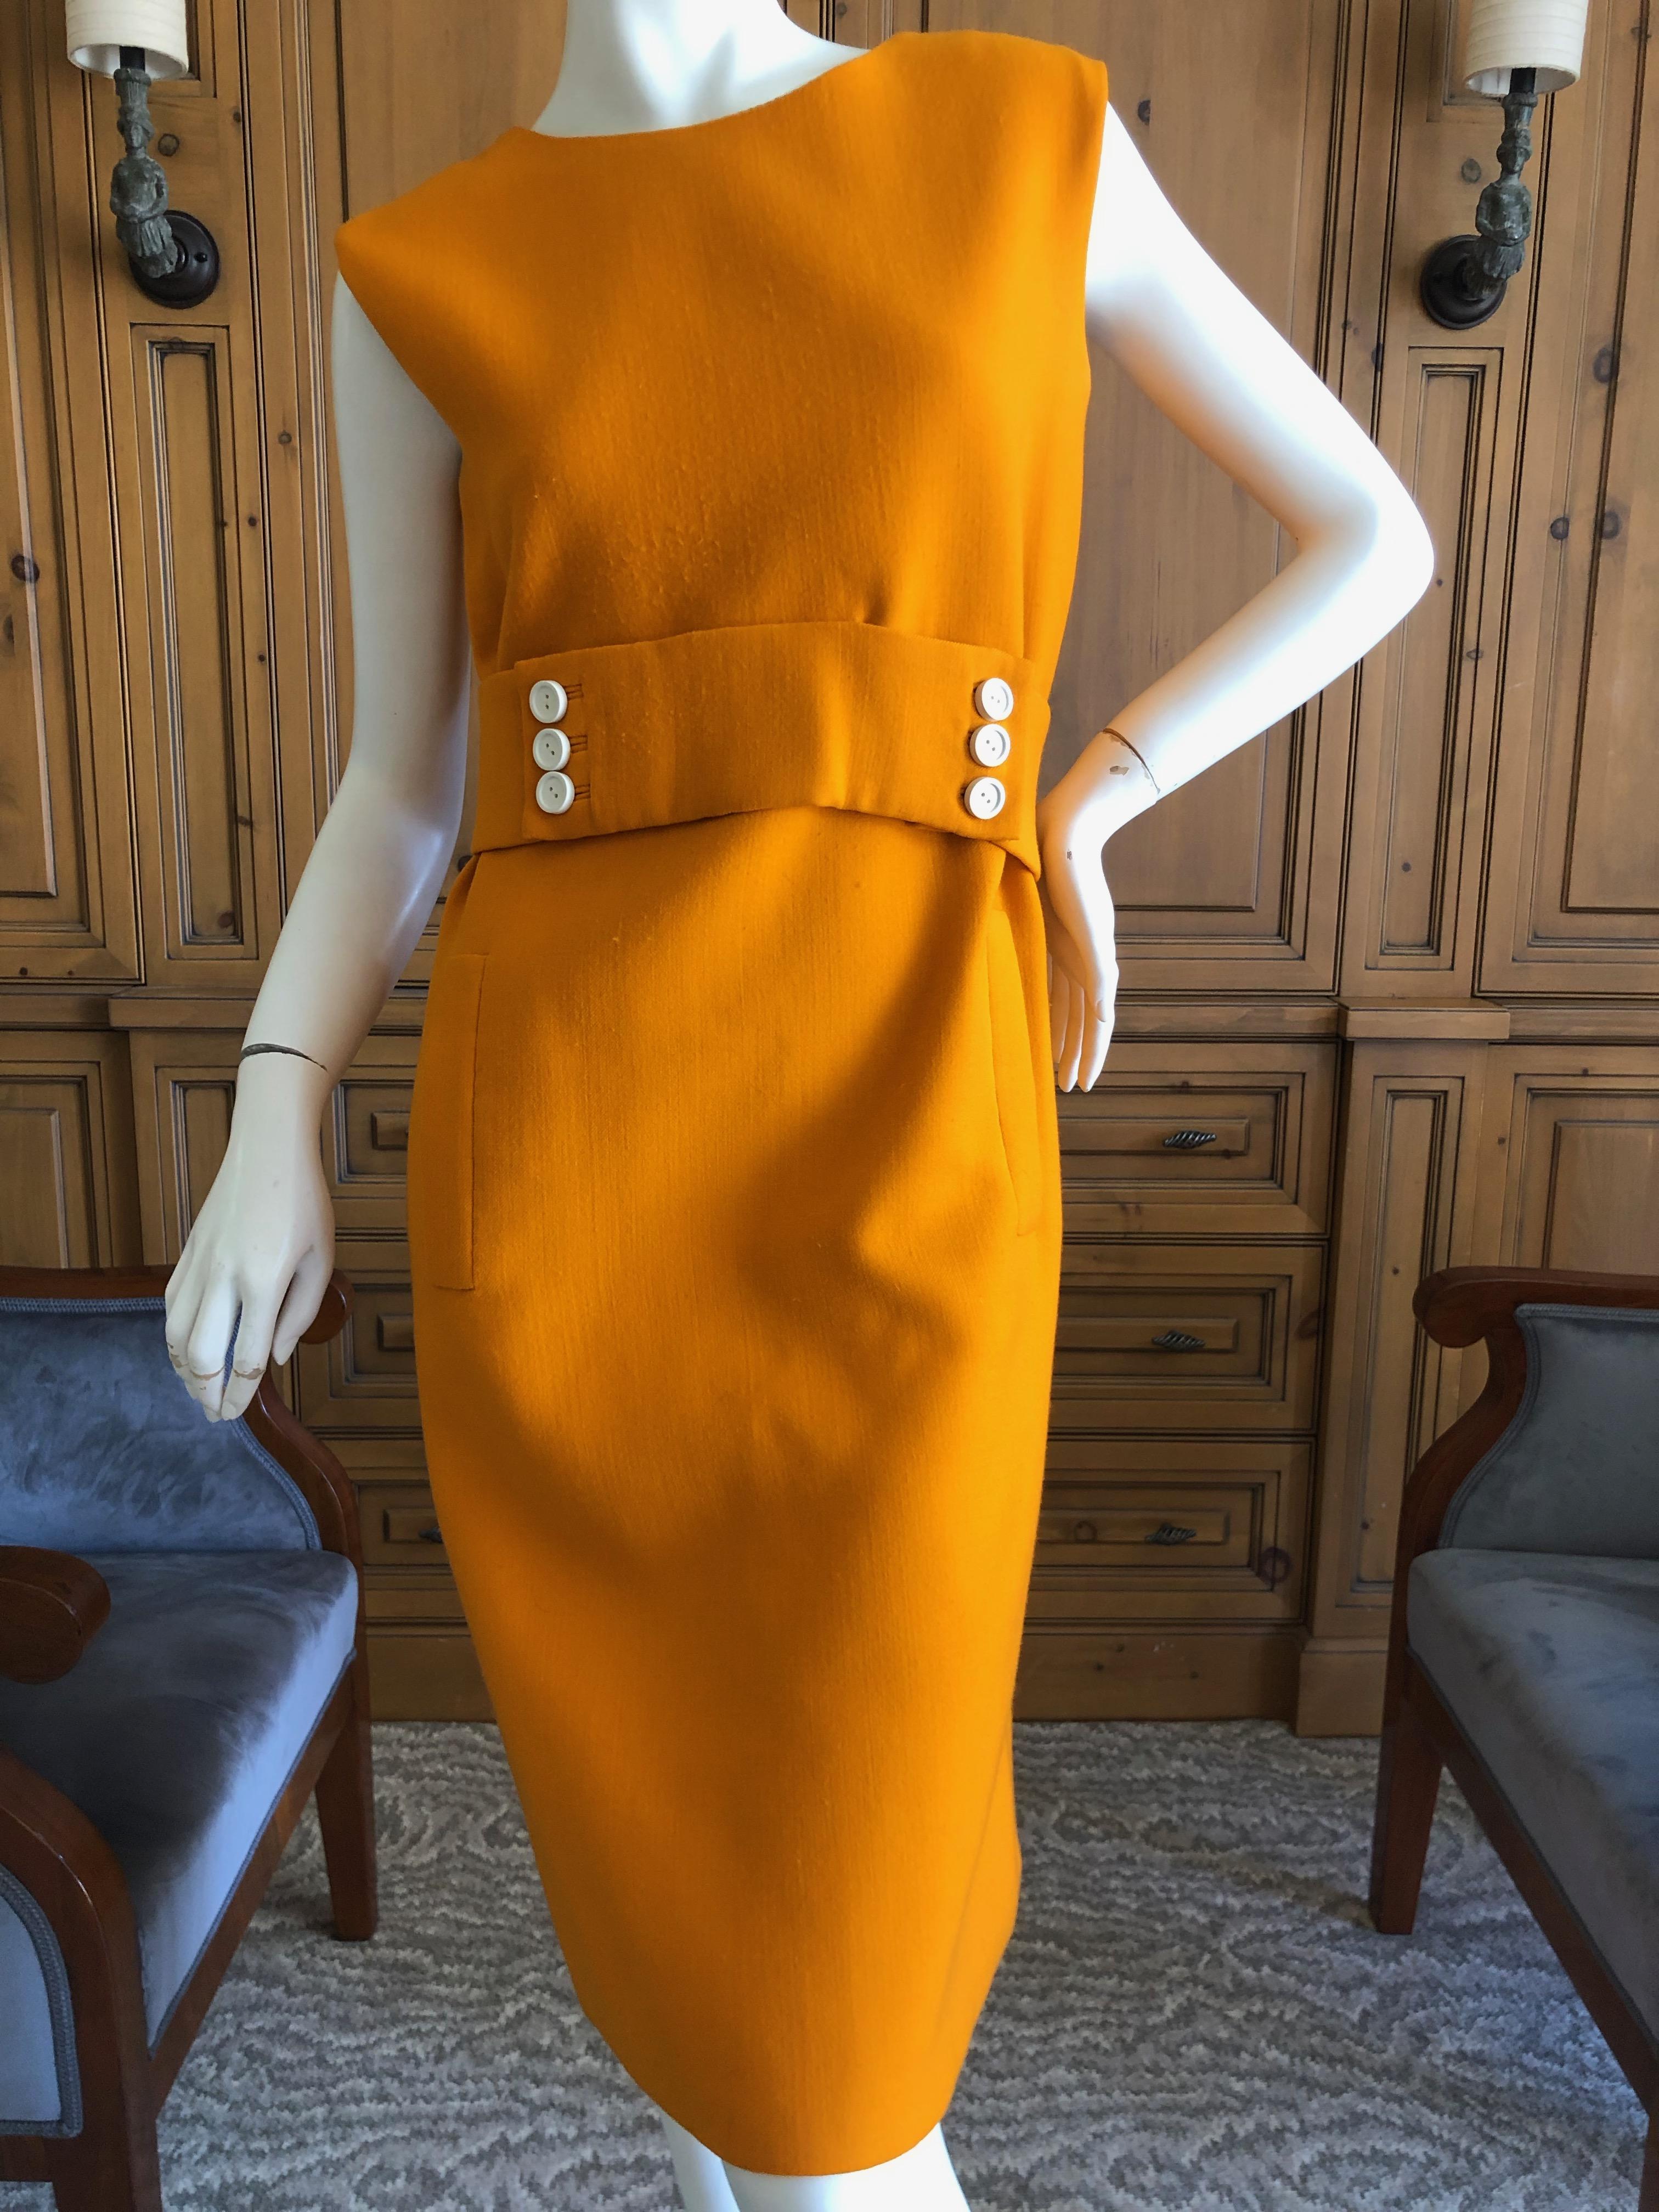 Norman Norell 1960's Sleeveless Orange Shift Dress with Attached Belt.
Lined in silk .
In excellent condition.
Bust 38